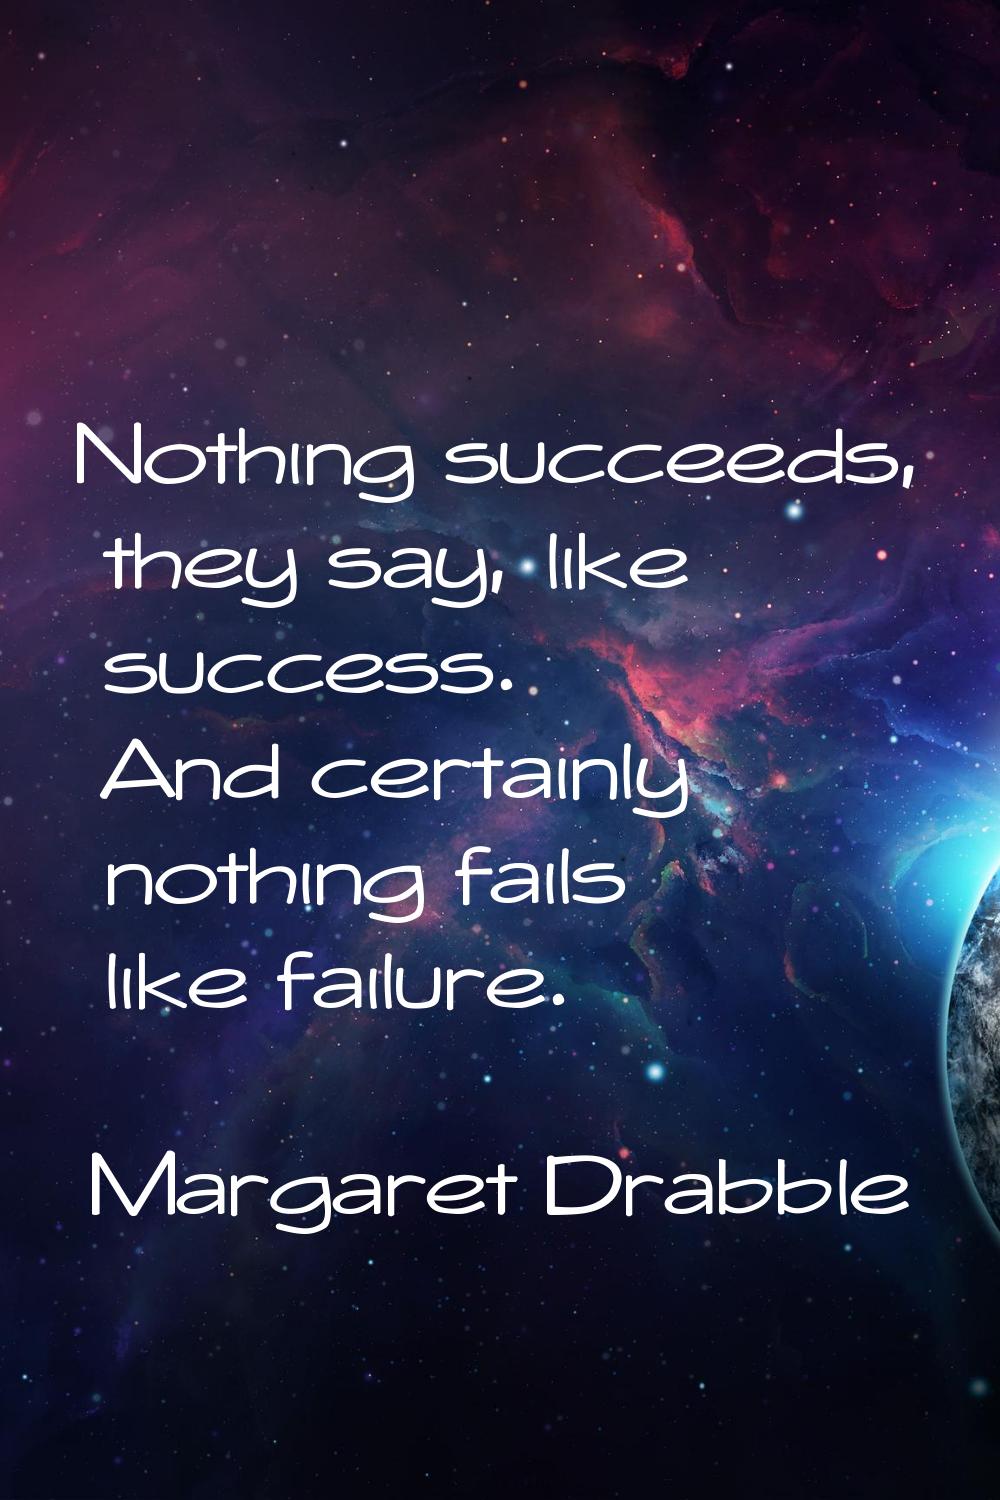 Nothing succeeds, they say, like success. And certainly nothing fails like failure.